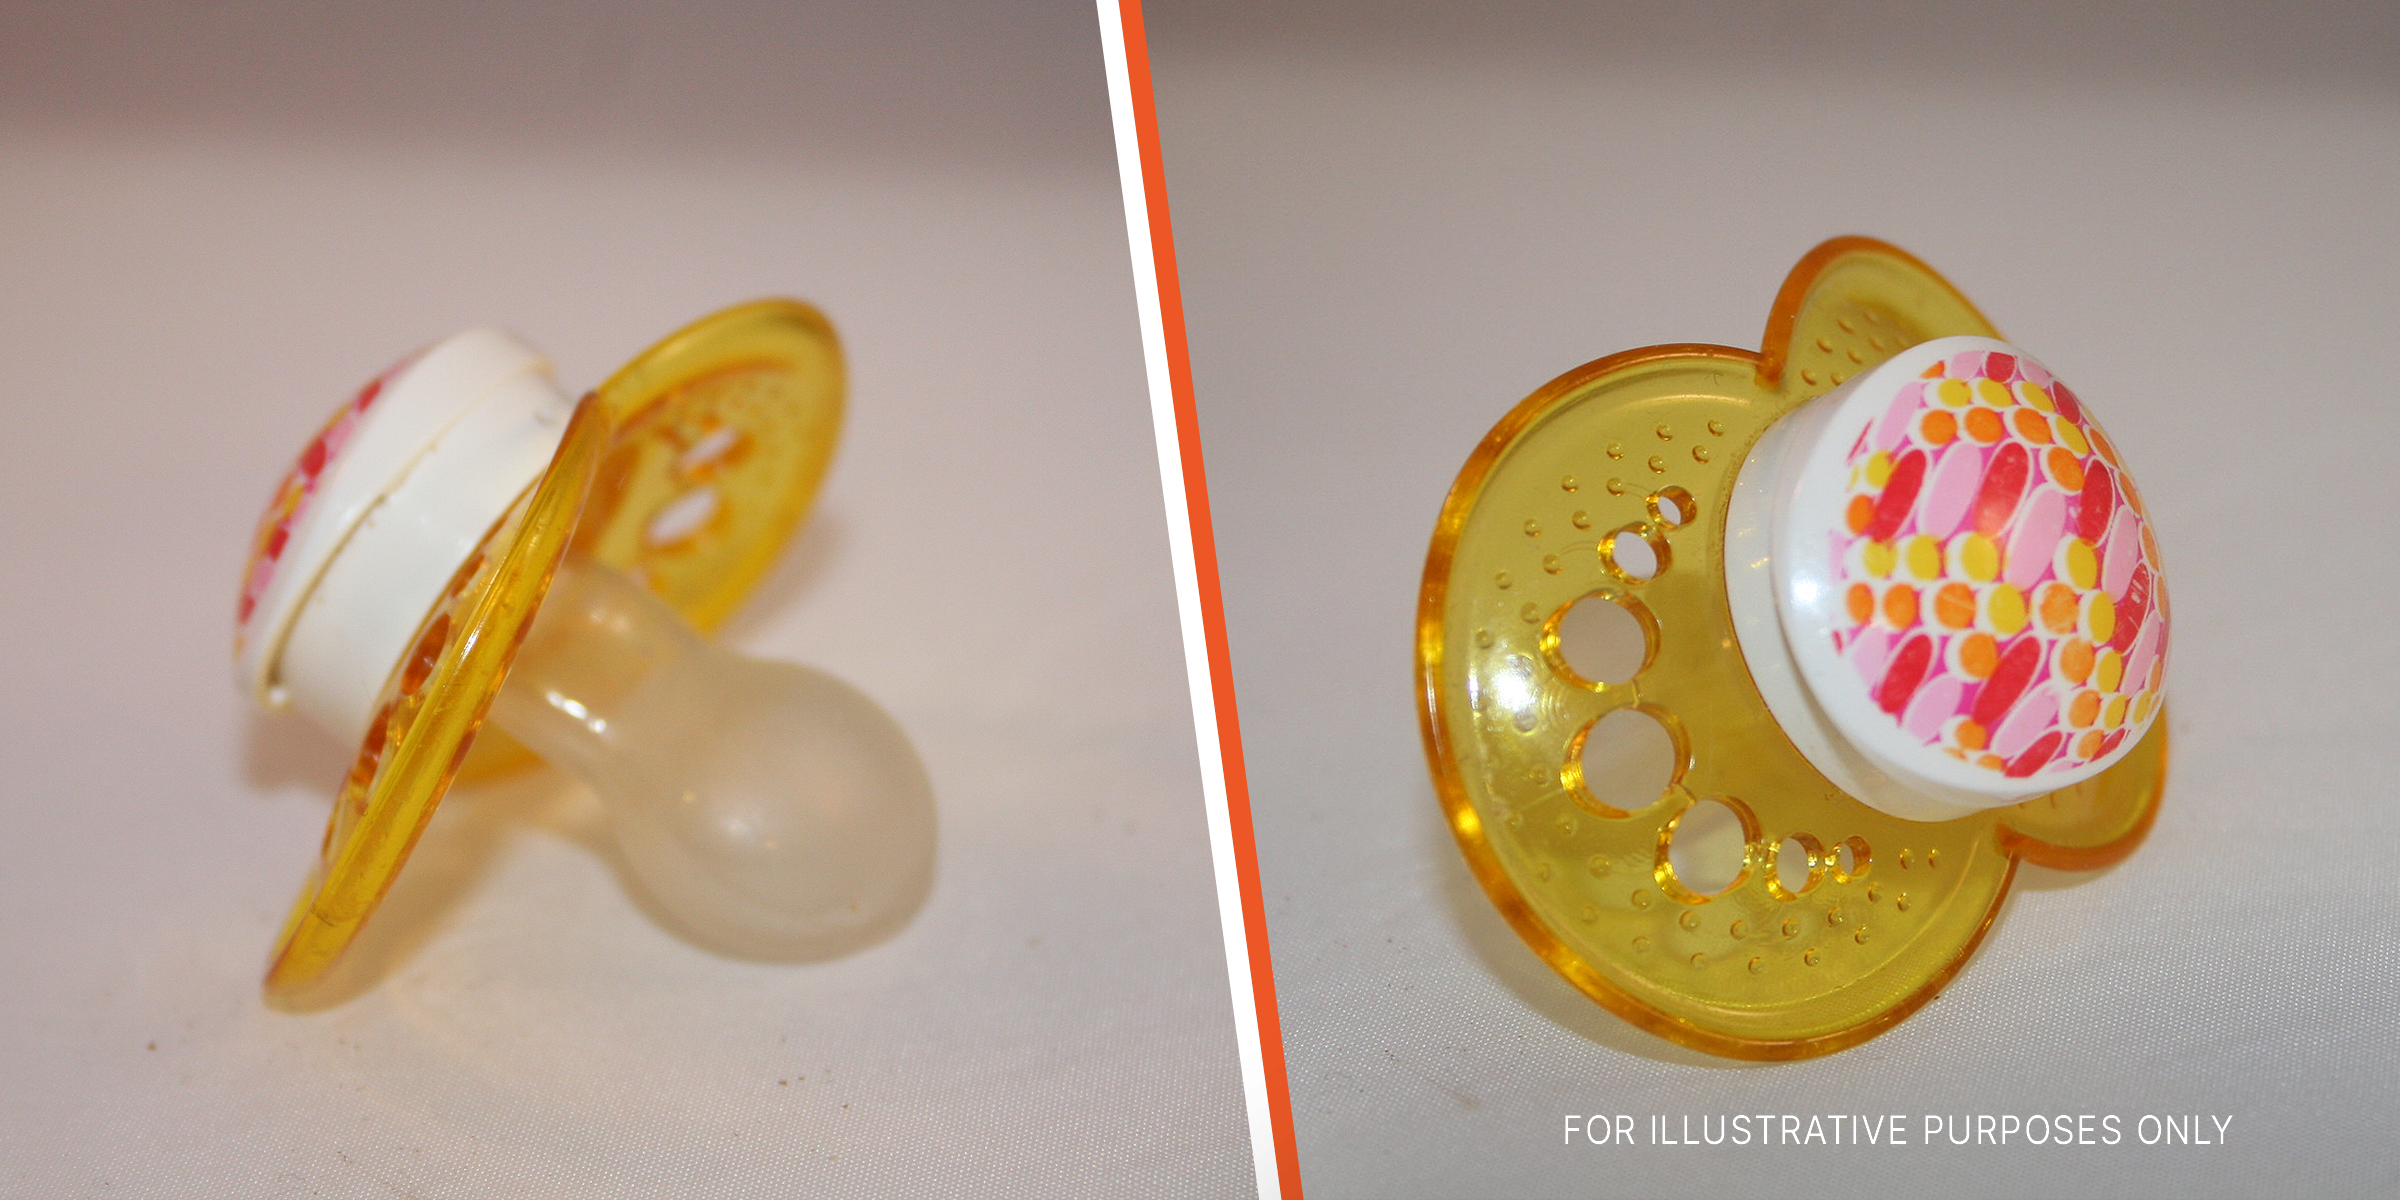 A yellow pacifier | Source: flic.kr